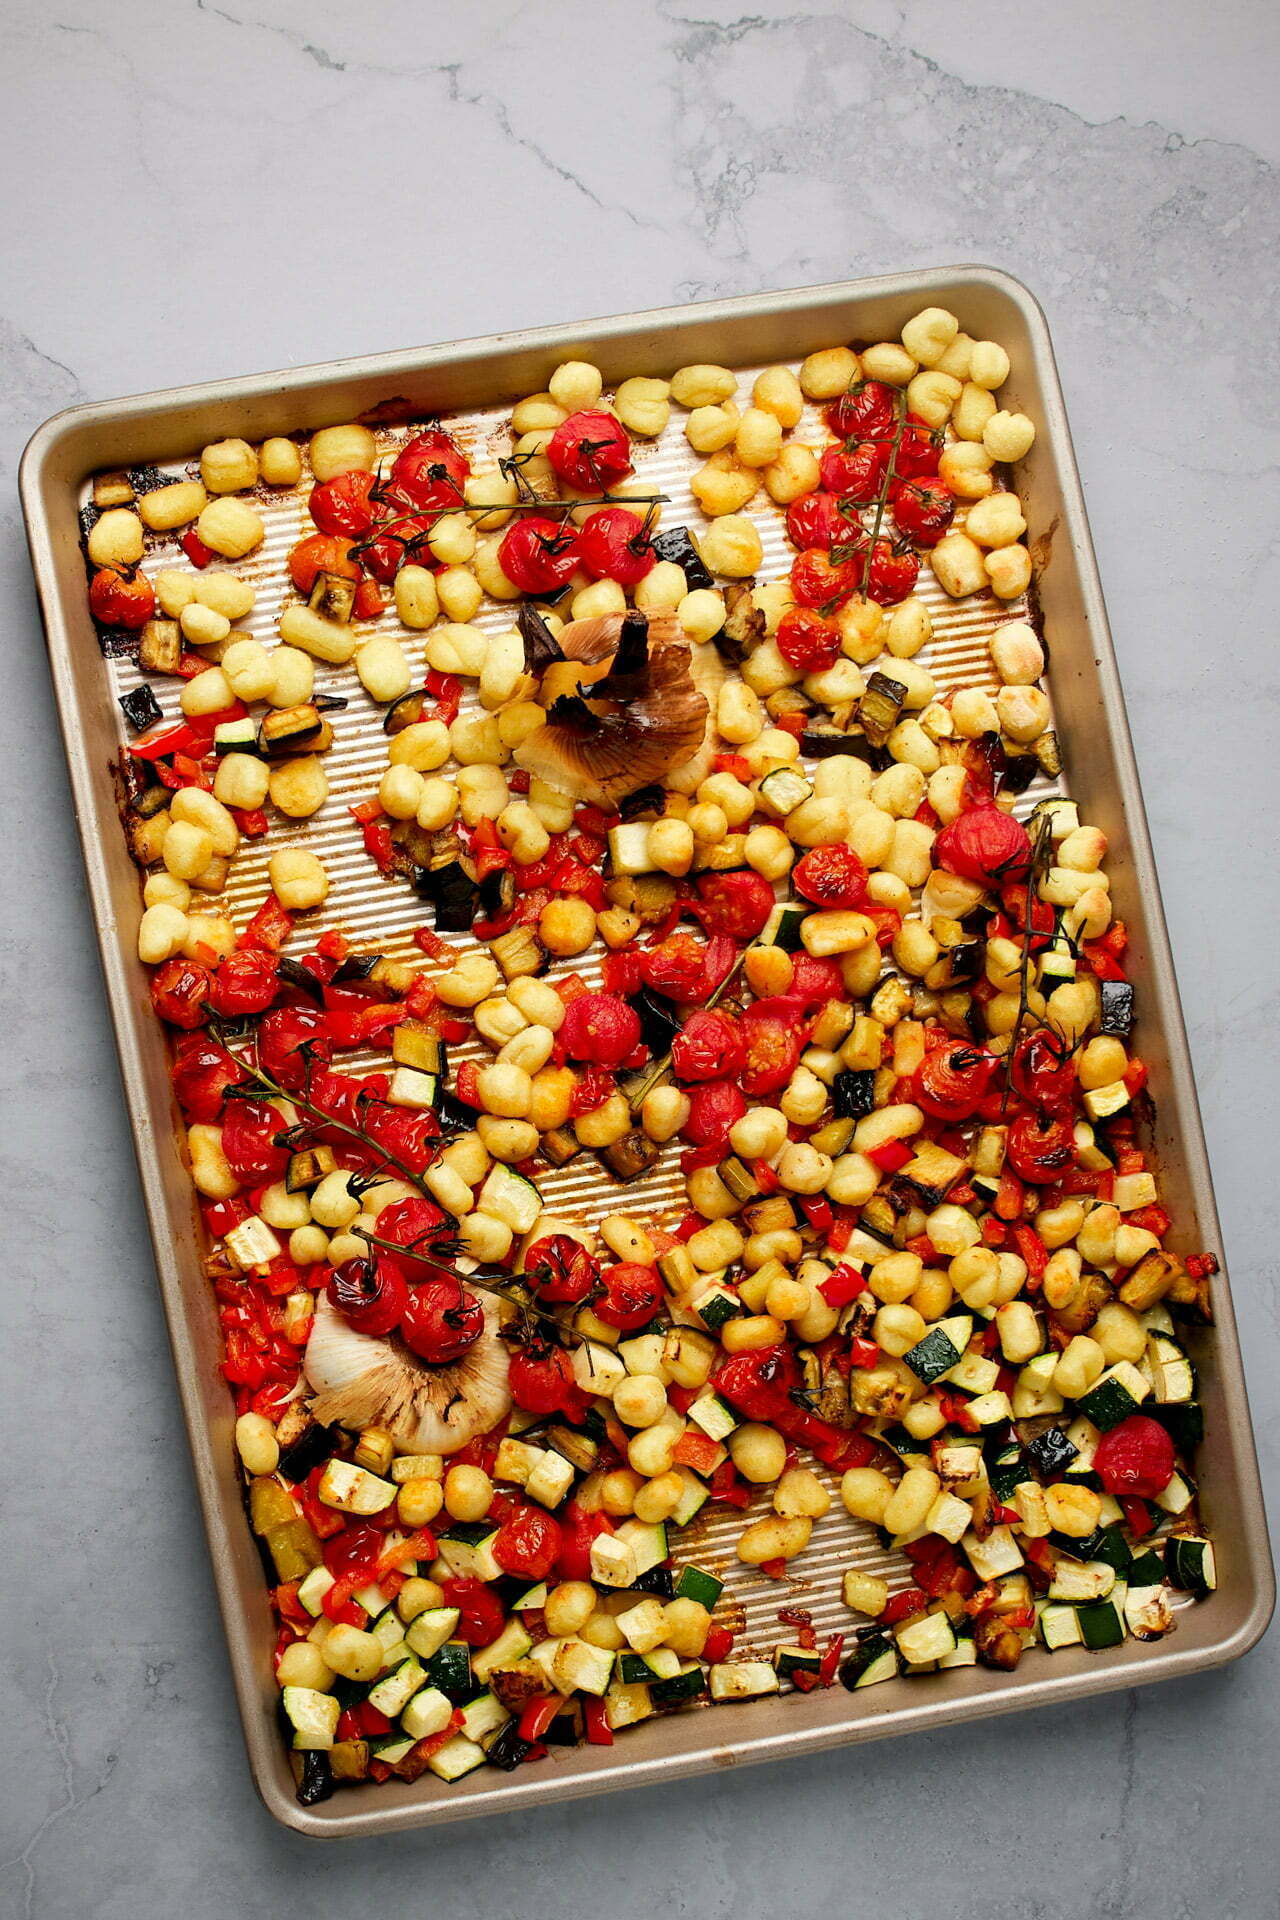 A baking sheet filled with roasted vegetables, including cherry tomatoes, zucchini, and onions, alongside golden brown sheet pan gnocchi, all spread evenly across. The vegetables are charred at the edges, creating a colorful and appetizing mixture drizzled with herbed butter. The background is a light gray, stone-textured surface.